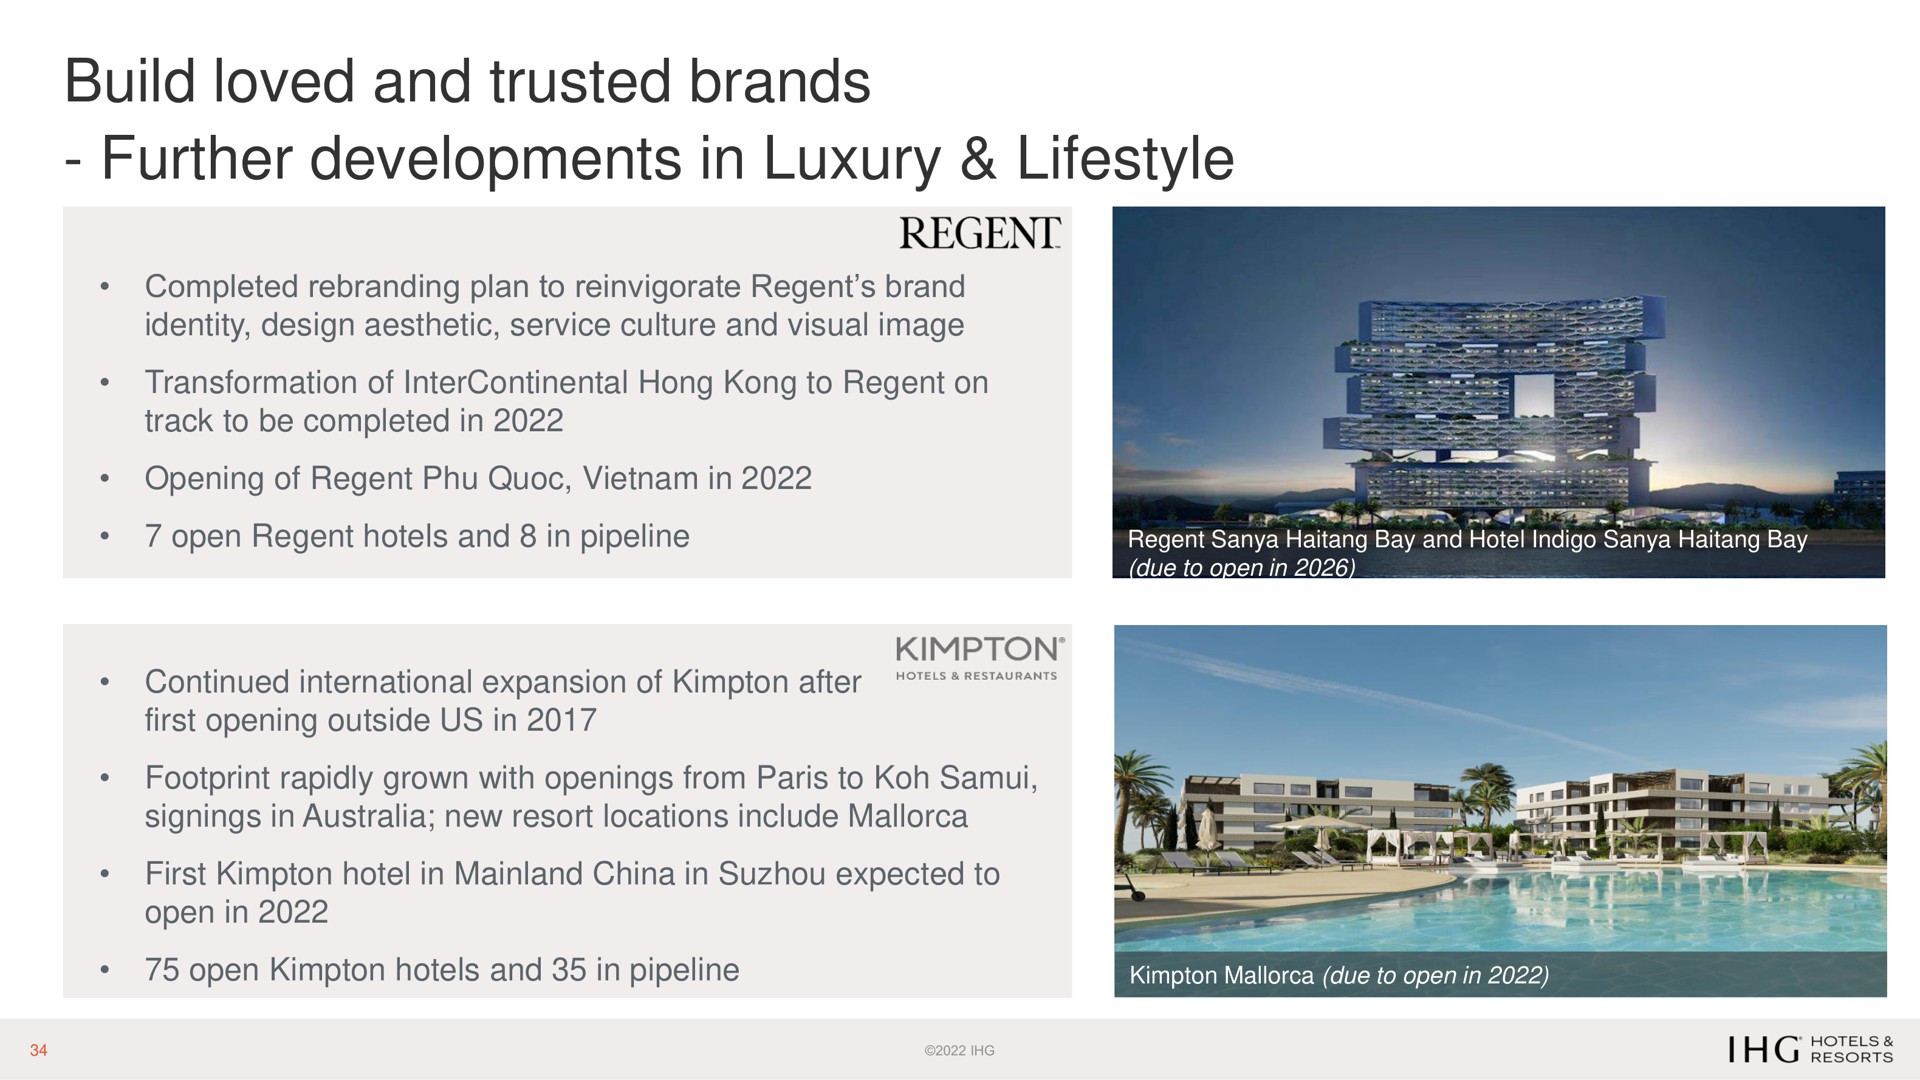 build loved and trusted brands further developments in luxury regent | IHG Hotels